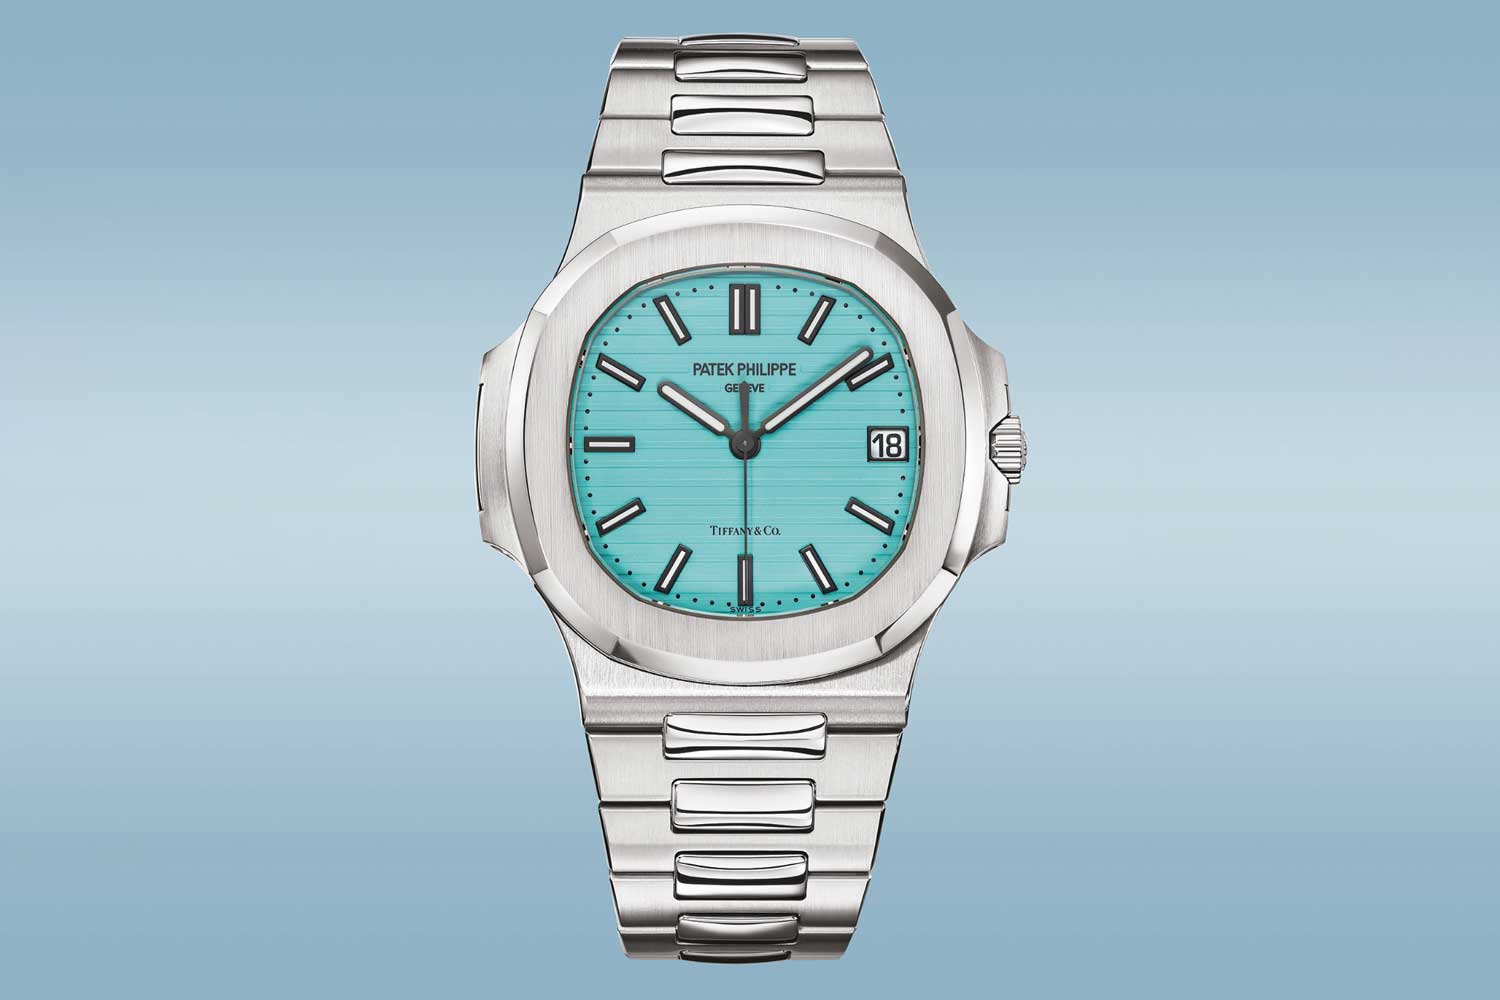 Patek Phillipe, Nautilus, Ref. 5711/1A-018 celebrates the 170-year alliance between Patek Philippe and Tiffany & Co with “Tiffany Blue” lacquer dial sold for the benefit of The Nature Conservancy